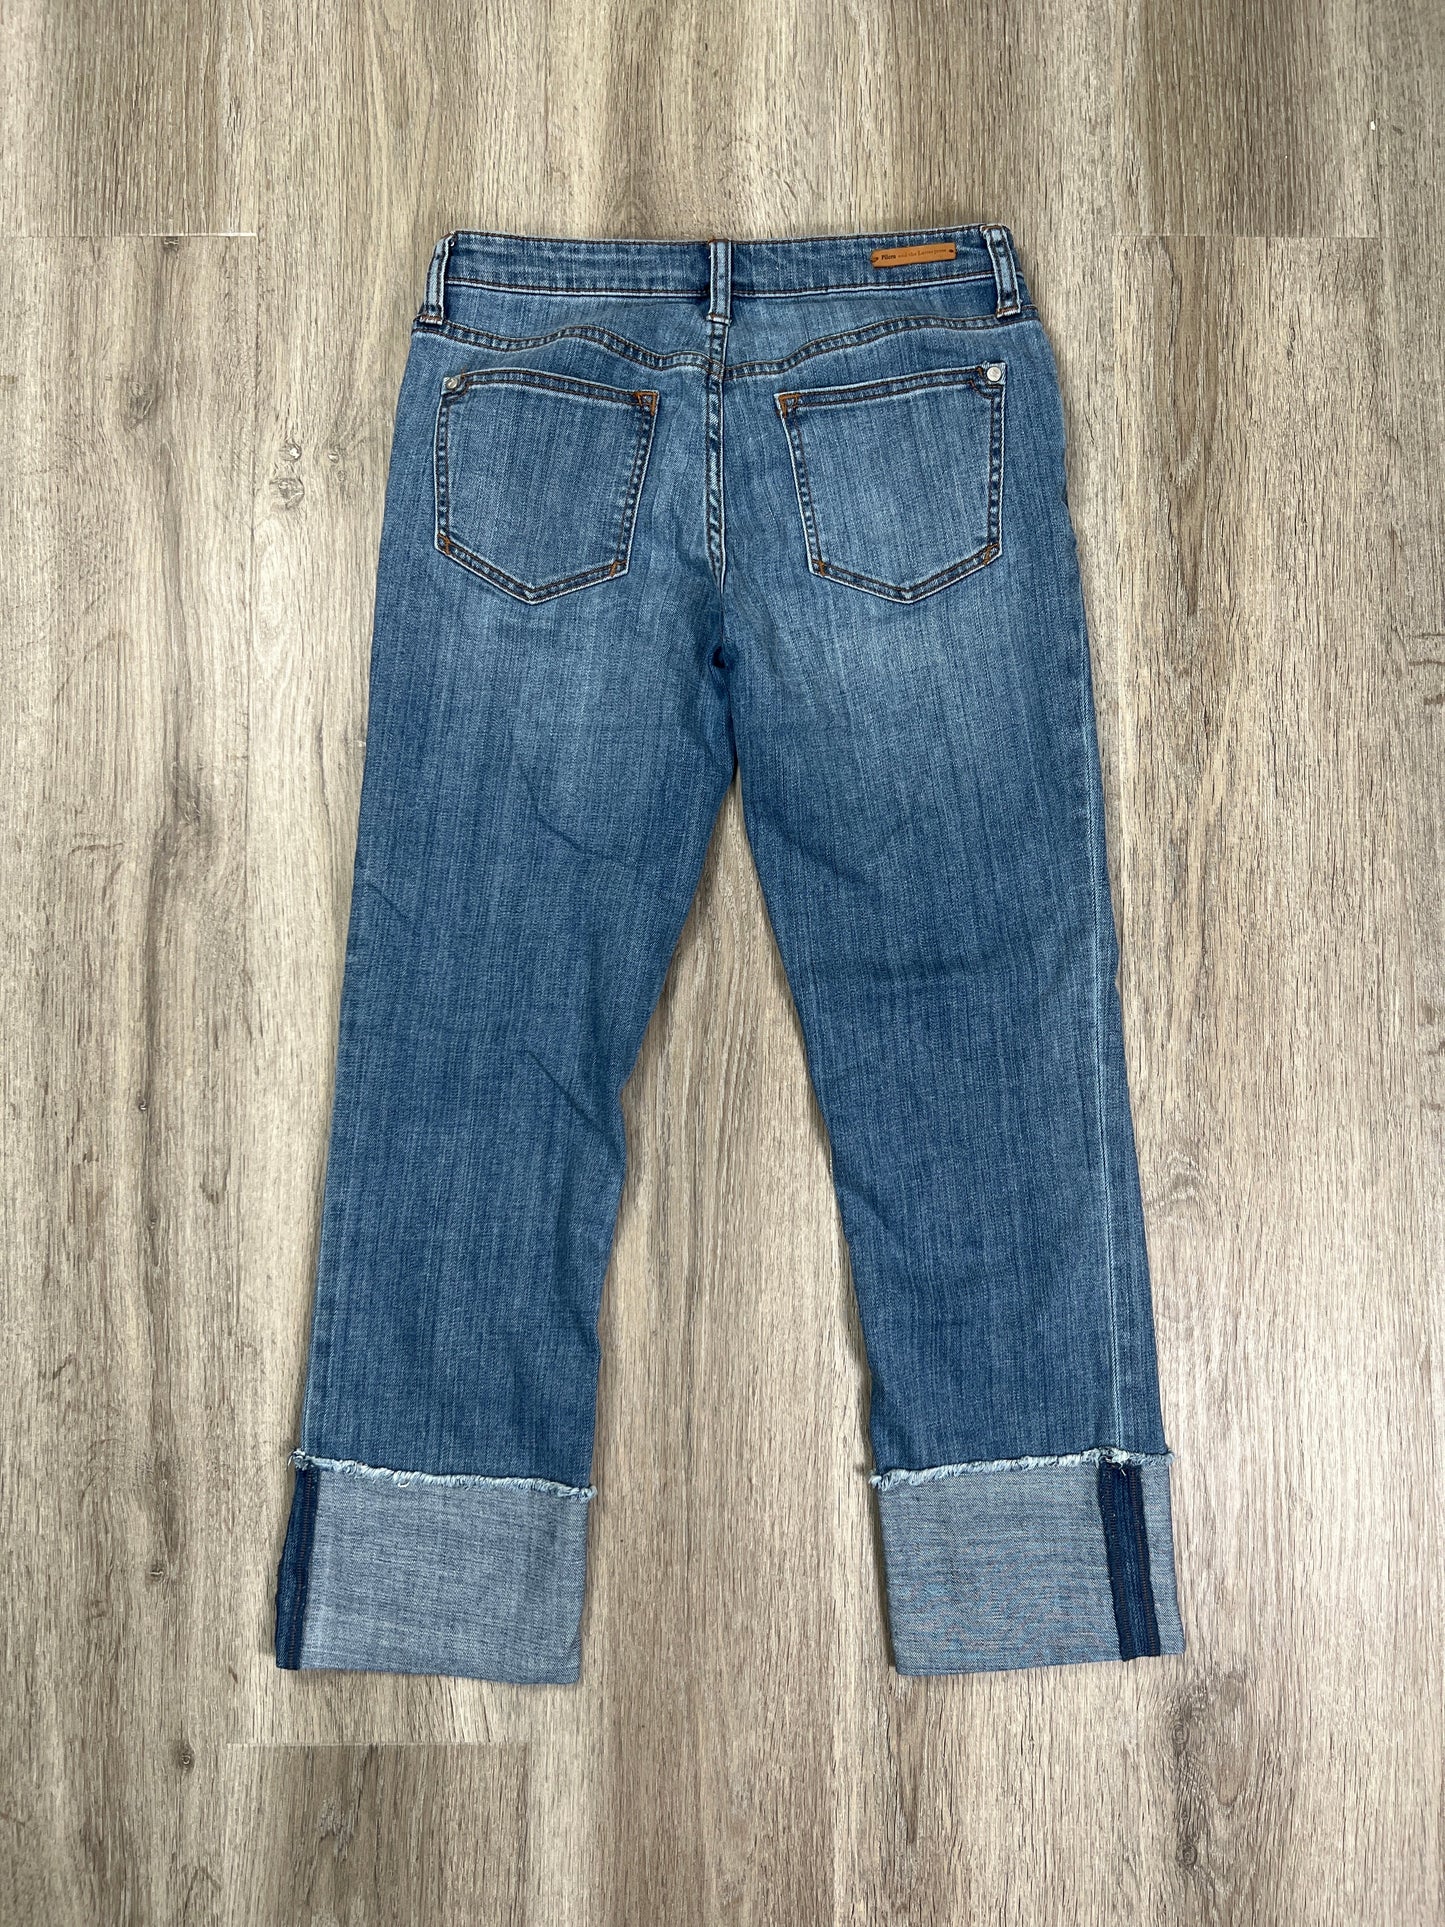 Jeans Straight By Pilcro  Size: 0